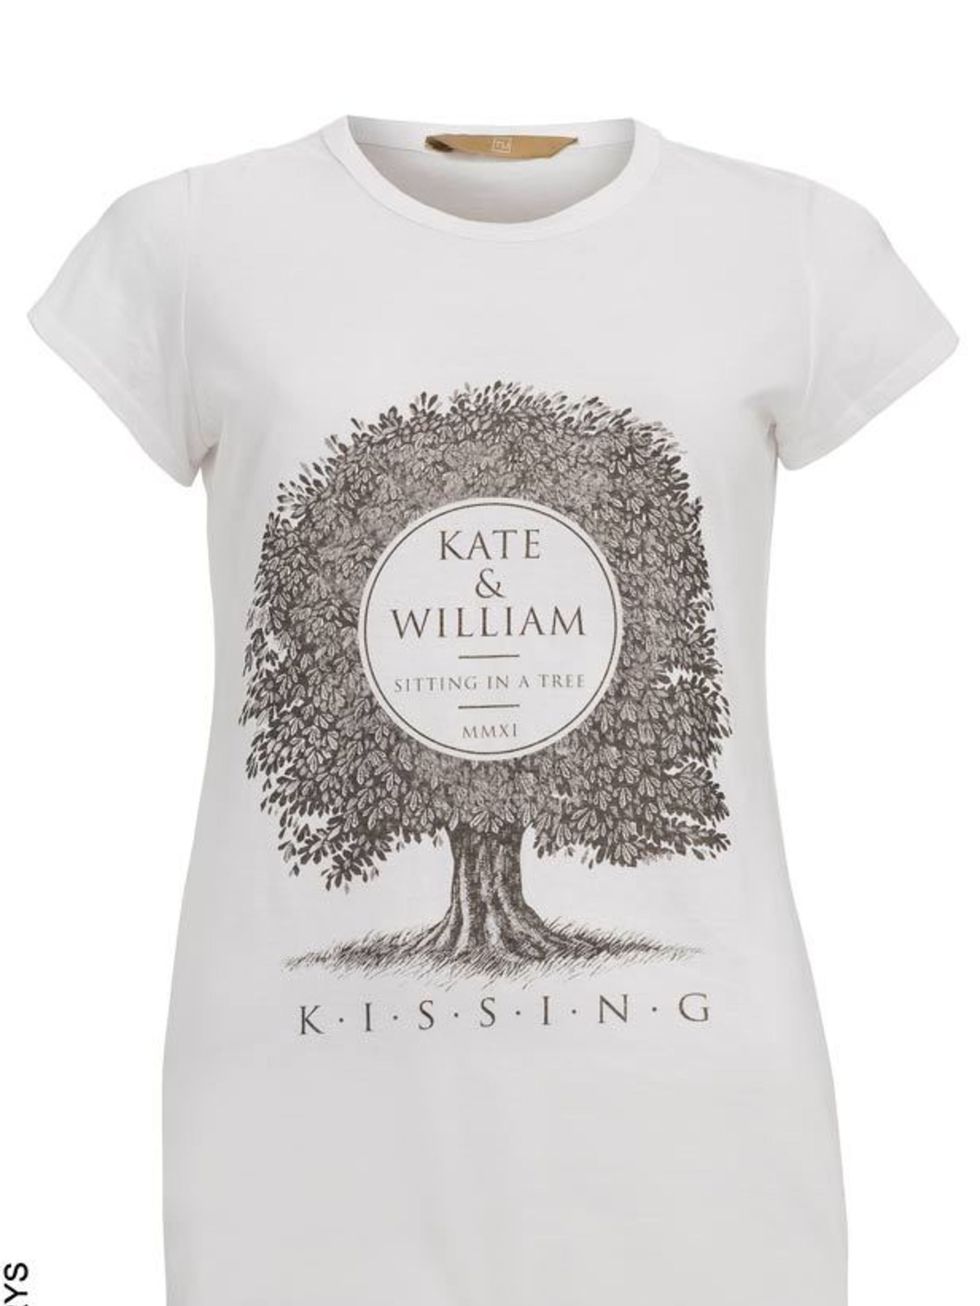 <p><a href="http://www.elleuk.com/starstyle/style-files/(section)/kate-middleton">Kate</a> &amp; William t-shirt, £10, at Sainsbury's</p>